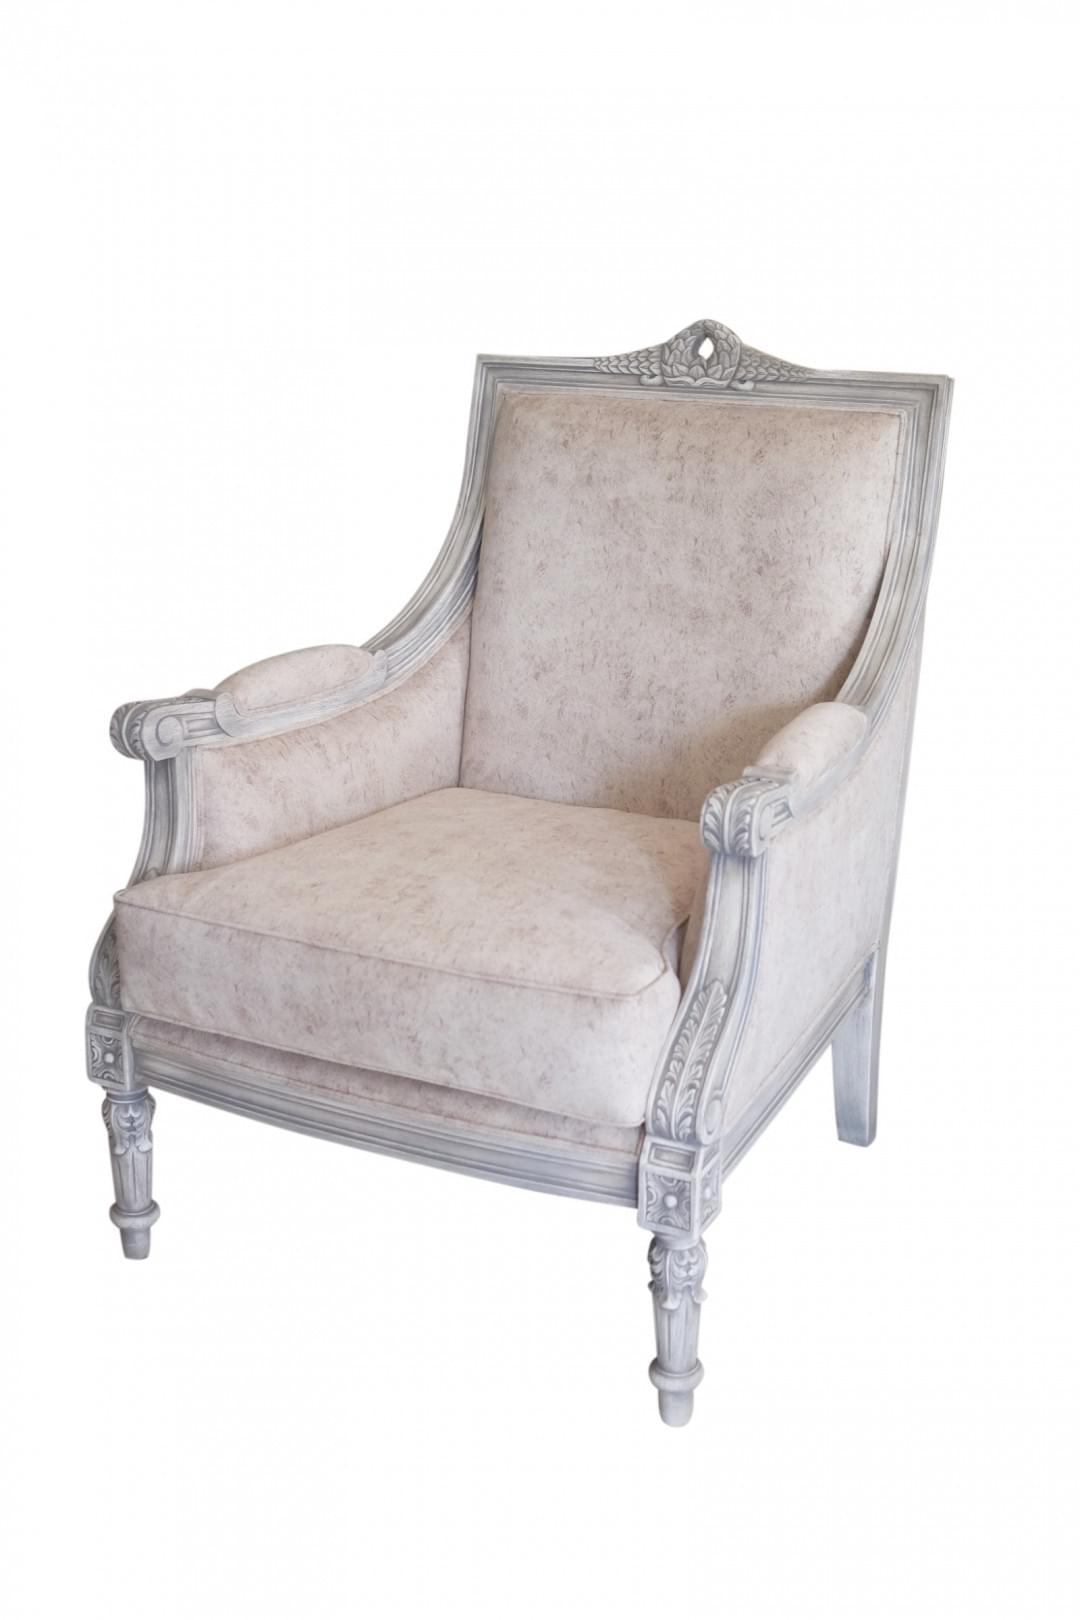 JEANNETTE ARMCHAIR from Lifetime Design Furniture